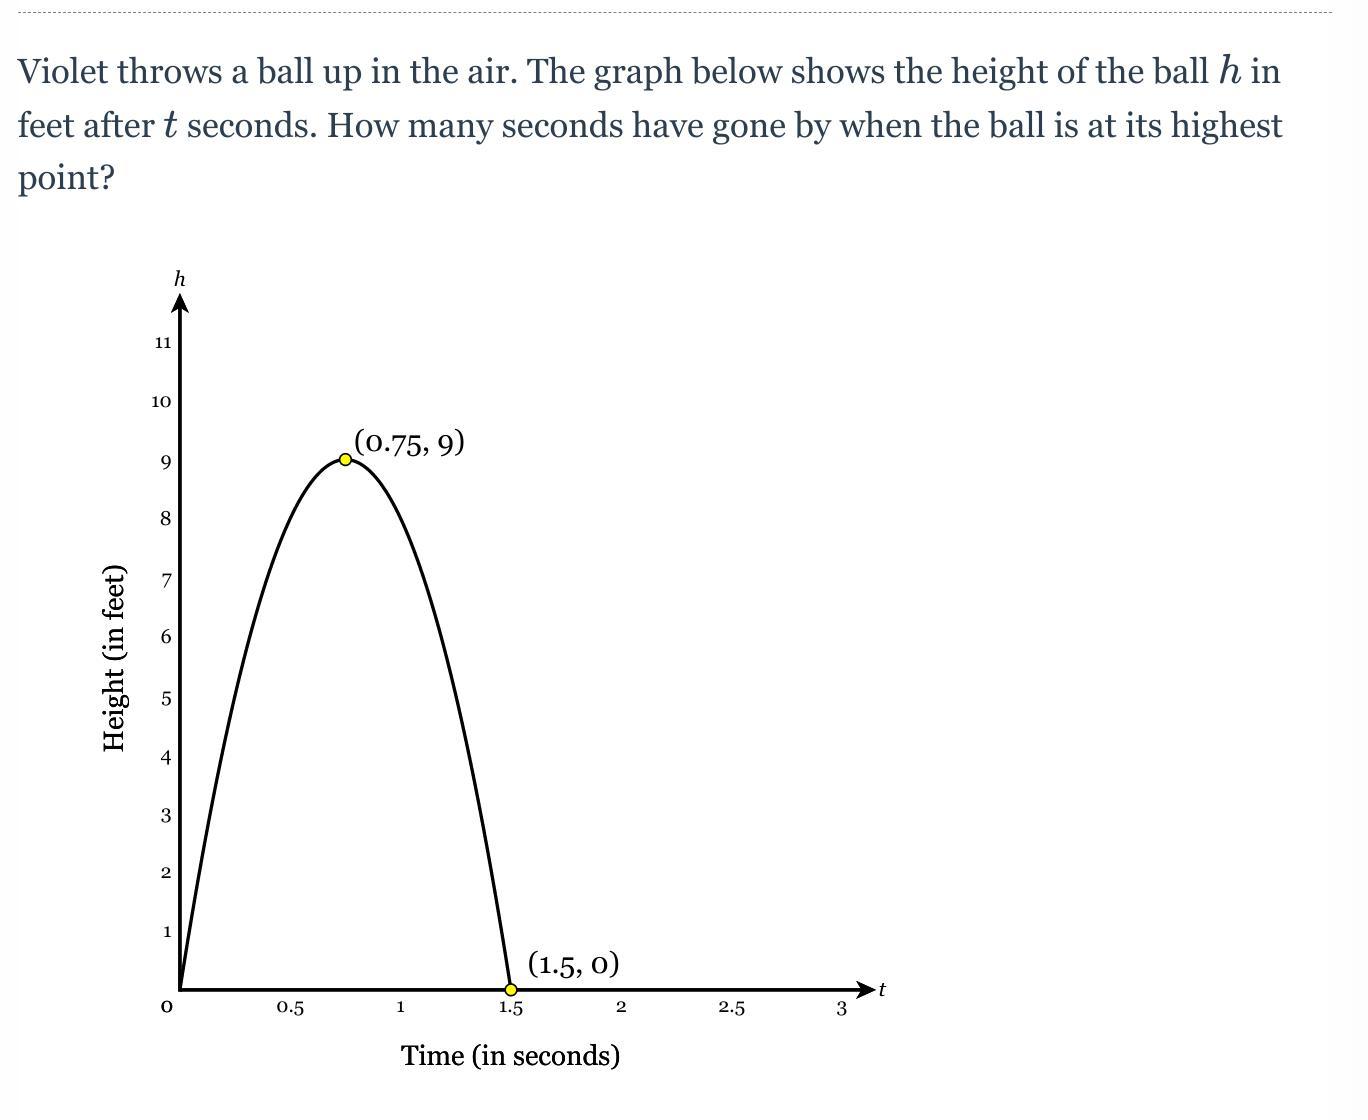 Violet Throws A Ball Up In The Air. The Graph Below Shows The Height Of The Ball H In Feet After T Seconds.